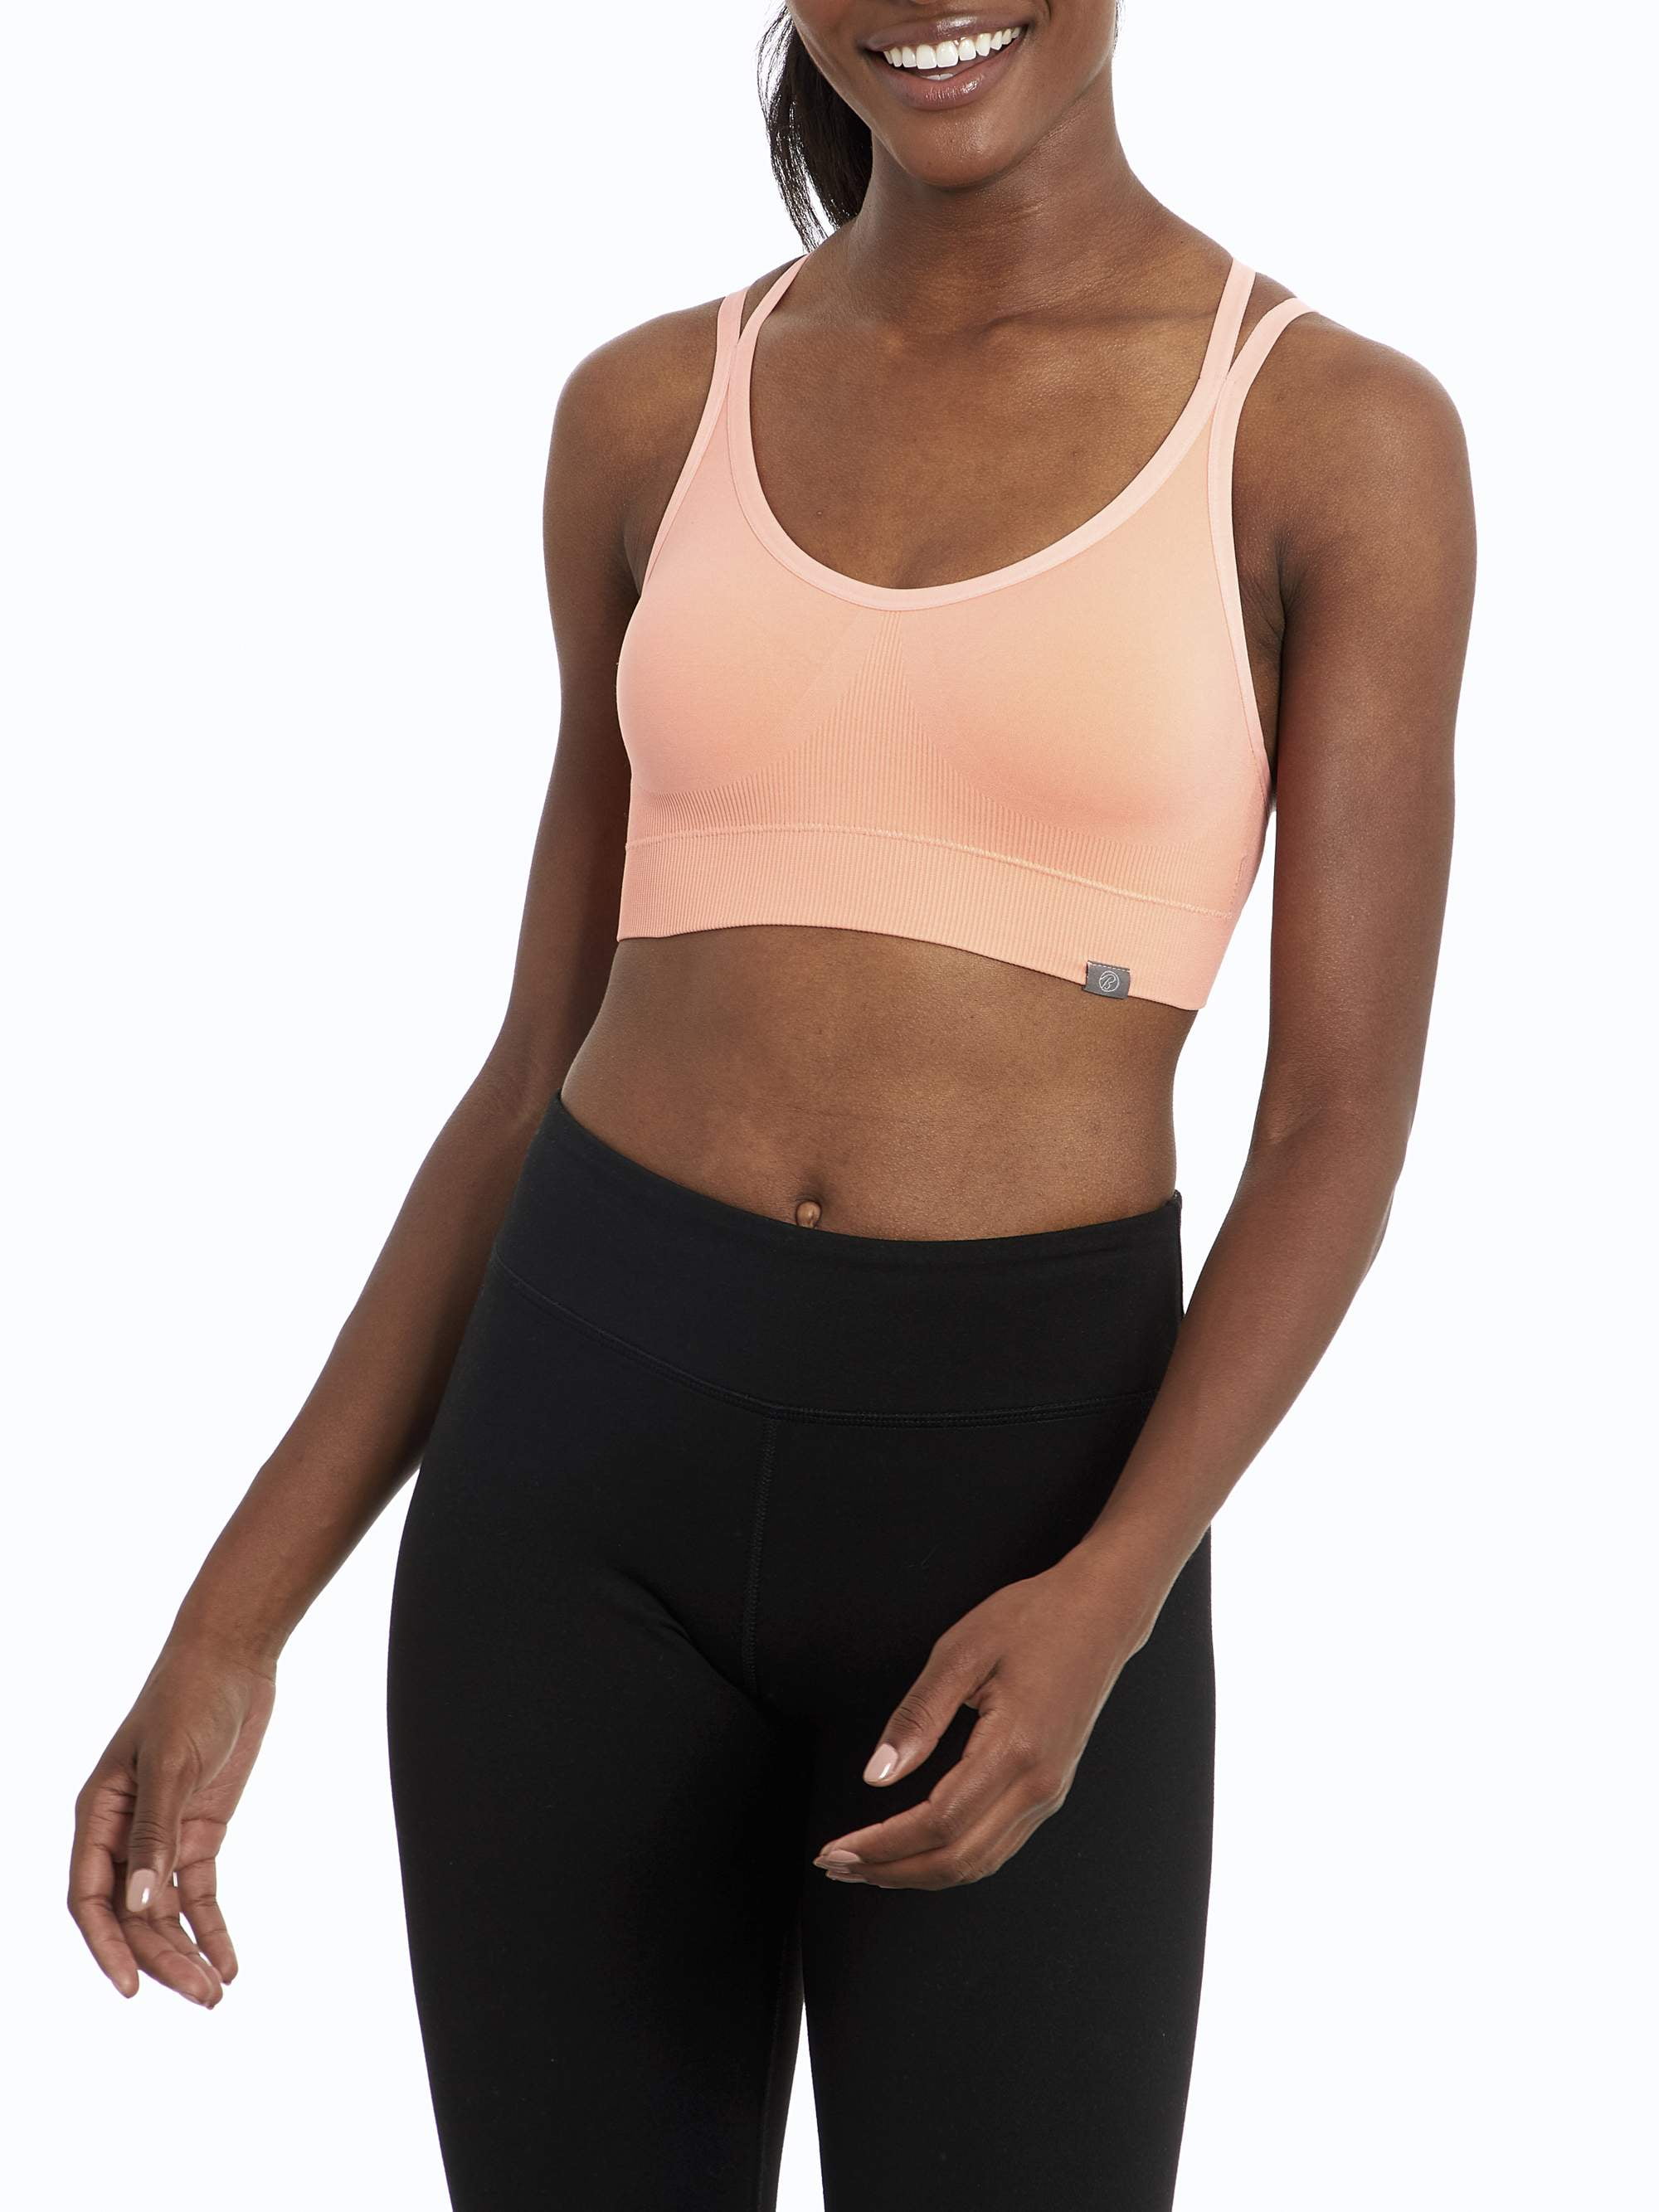 Bally Total Fitness Women's Lily Seamless Sports Bra-2 Pack, Black/Pink at   Women's Clothing store